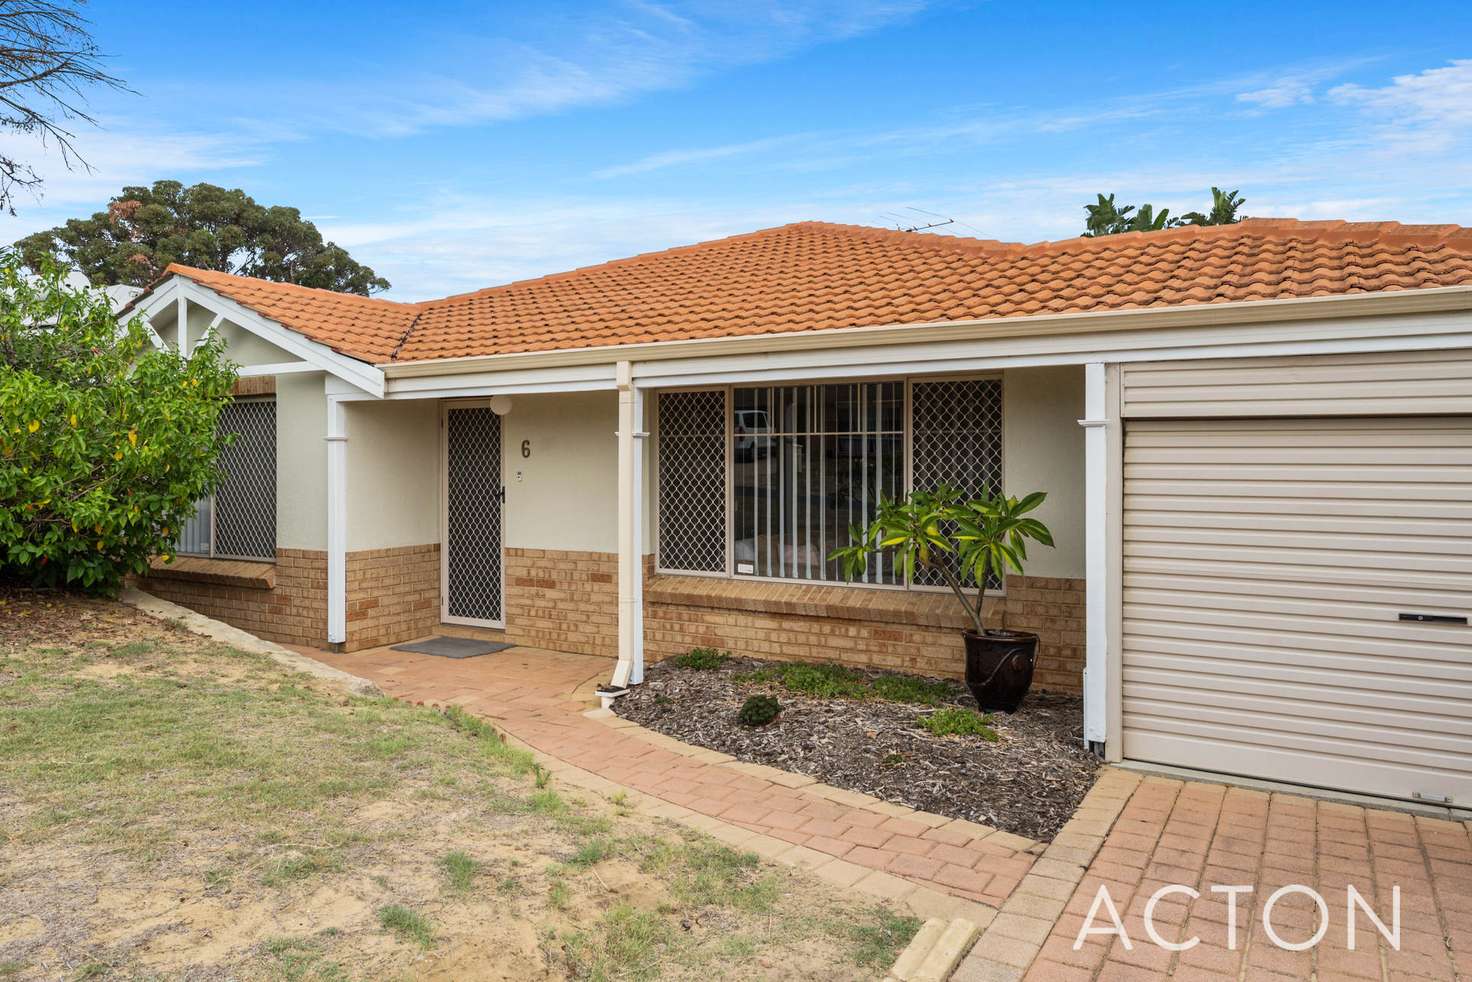 Main view of Homely house listing, 6 Hopman Rise, Clarkson WA 6030